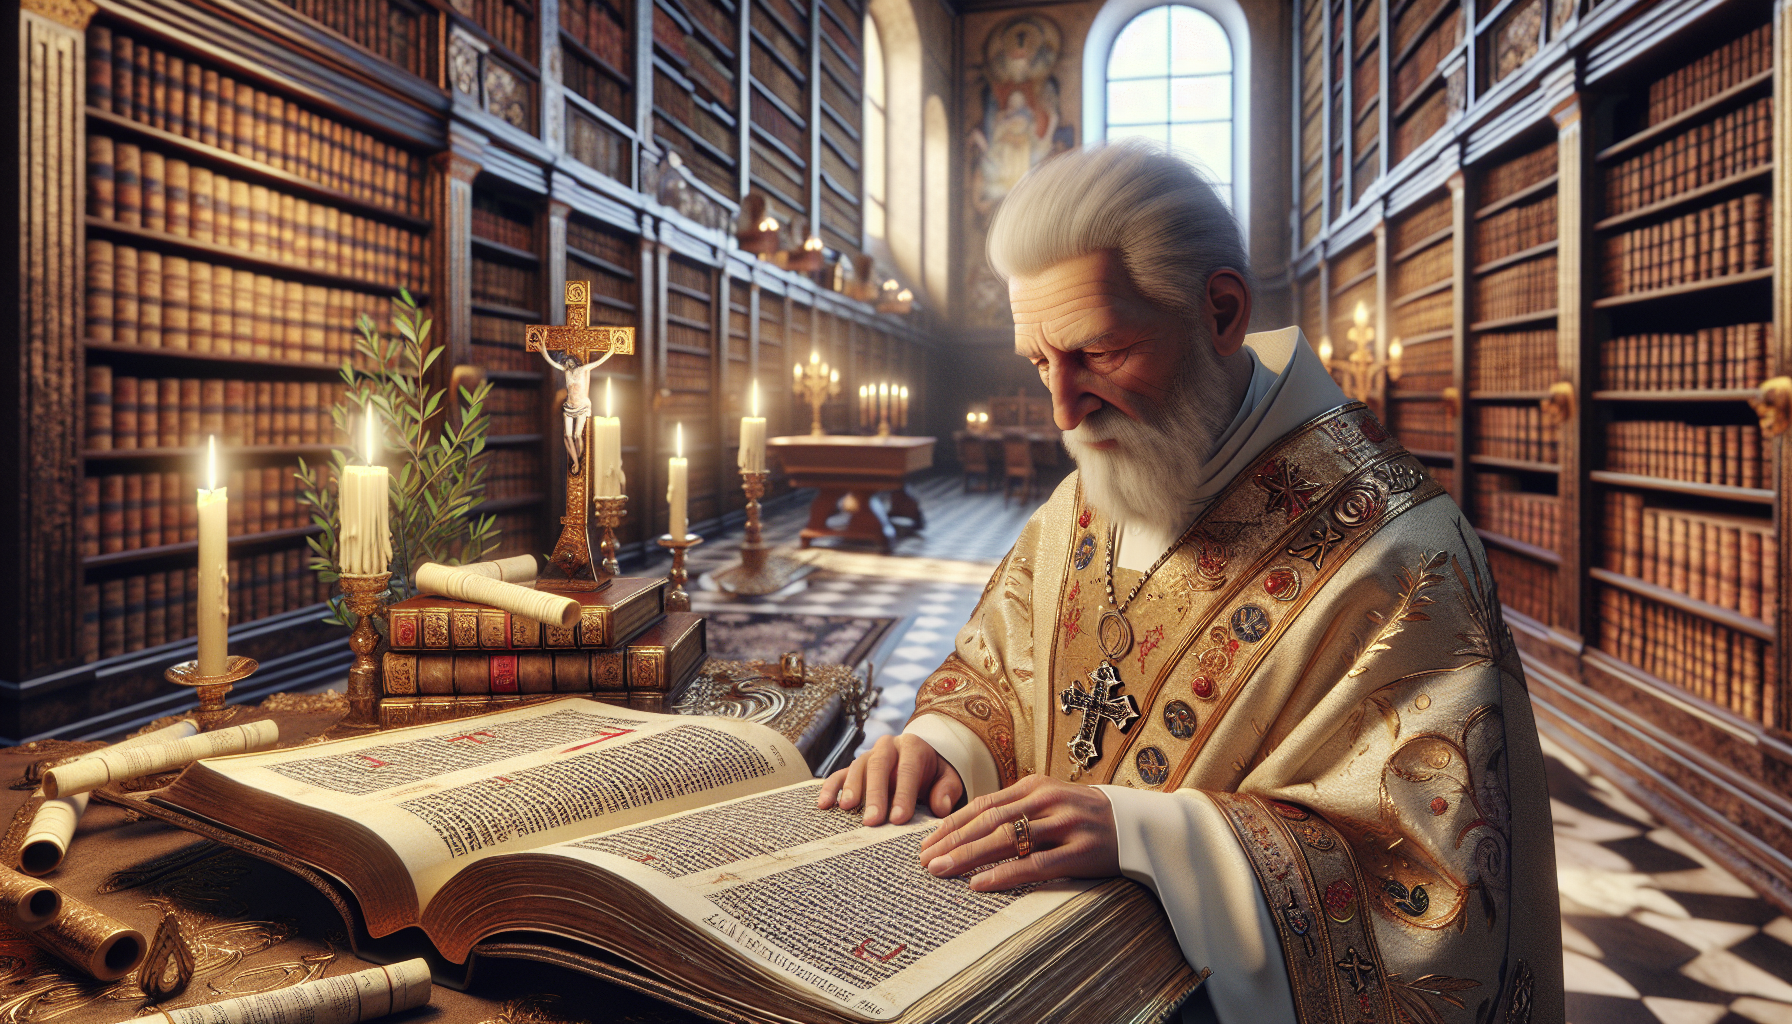 An ancient, peaceful library filled with scrolls and illuminated manuscripts, where a serene, elderly priest in traditional robes is studying a large, open Bible, surrounded by symbolic elements such